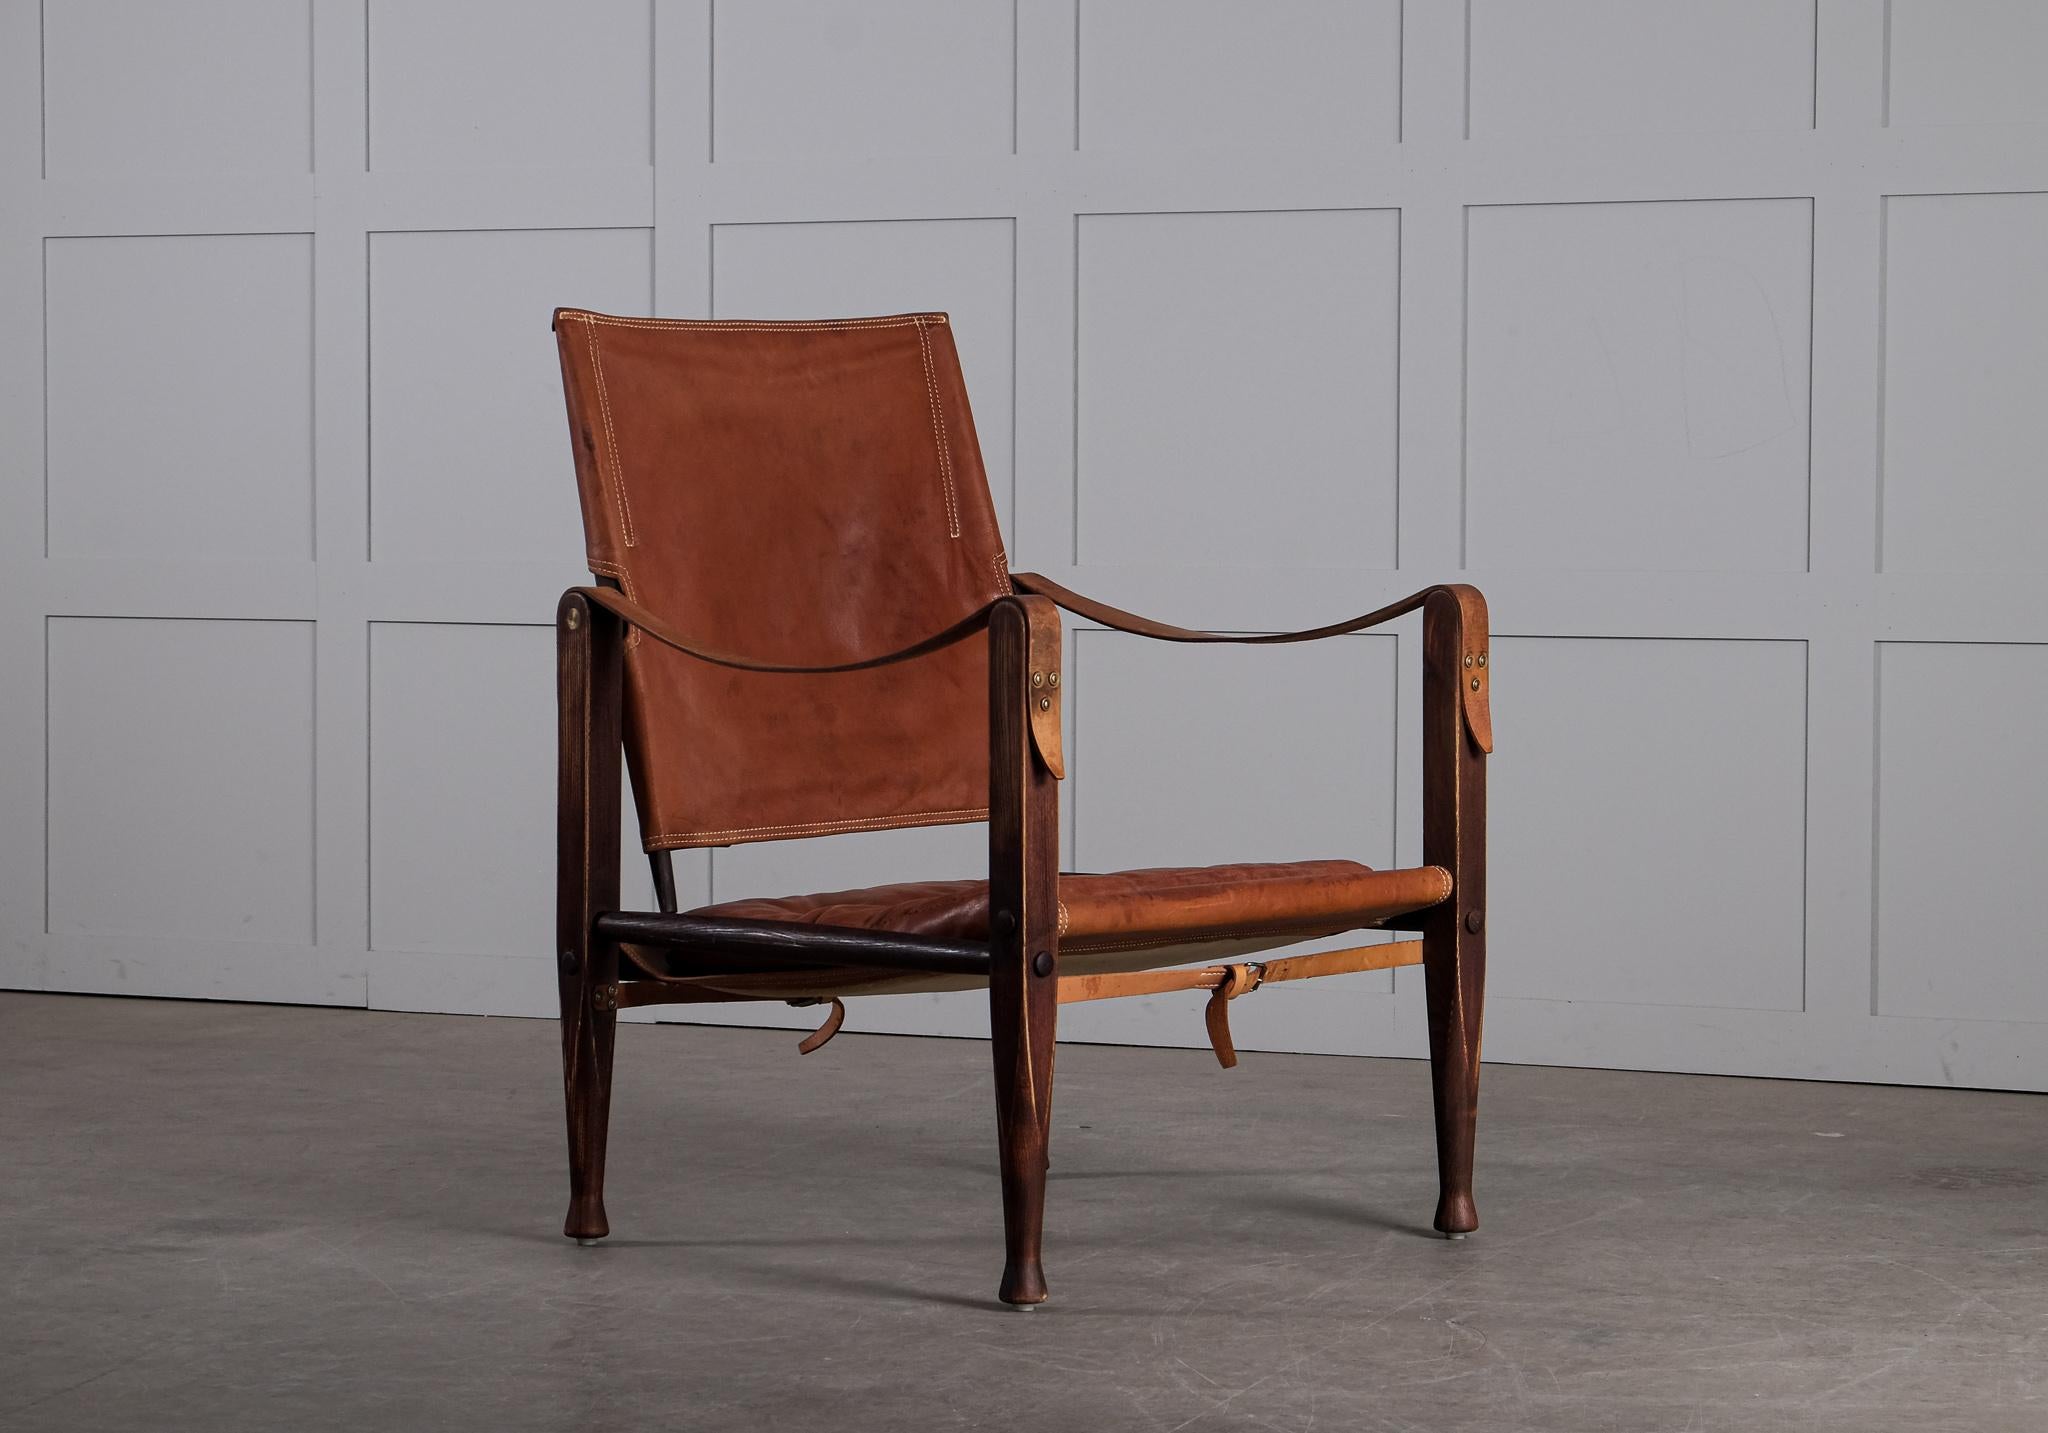 Safari chair with patinated cognac brown leather. Designed by Kaare Klint in 1933, produced by Rud. Rasmussen, Denmark.
   